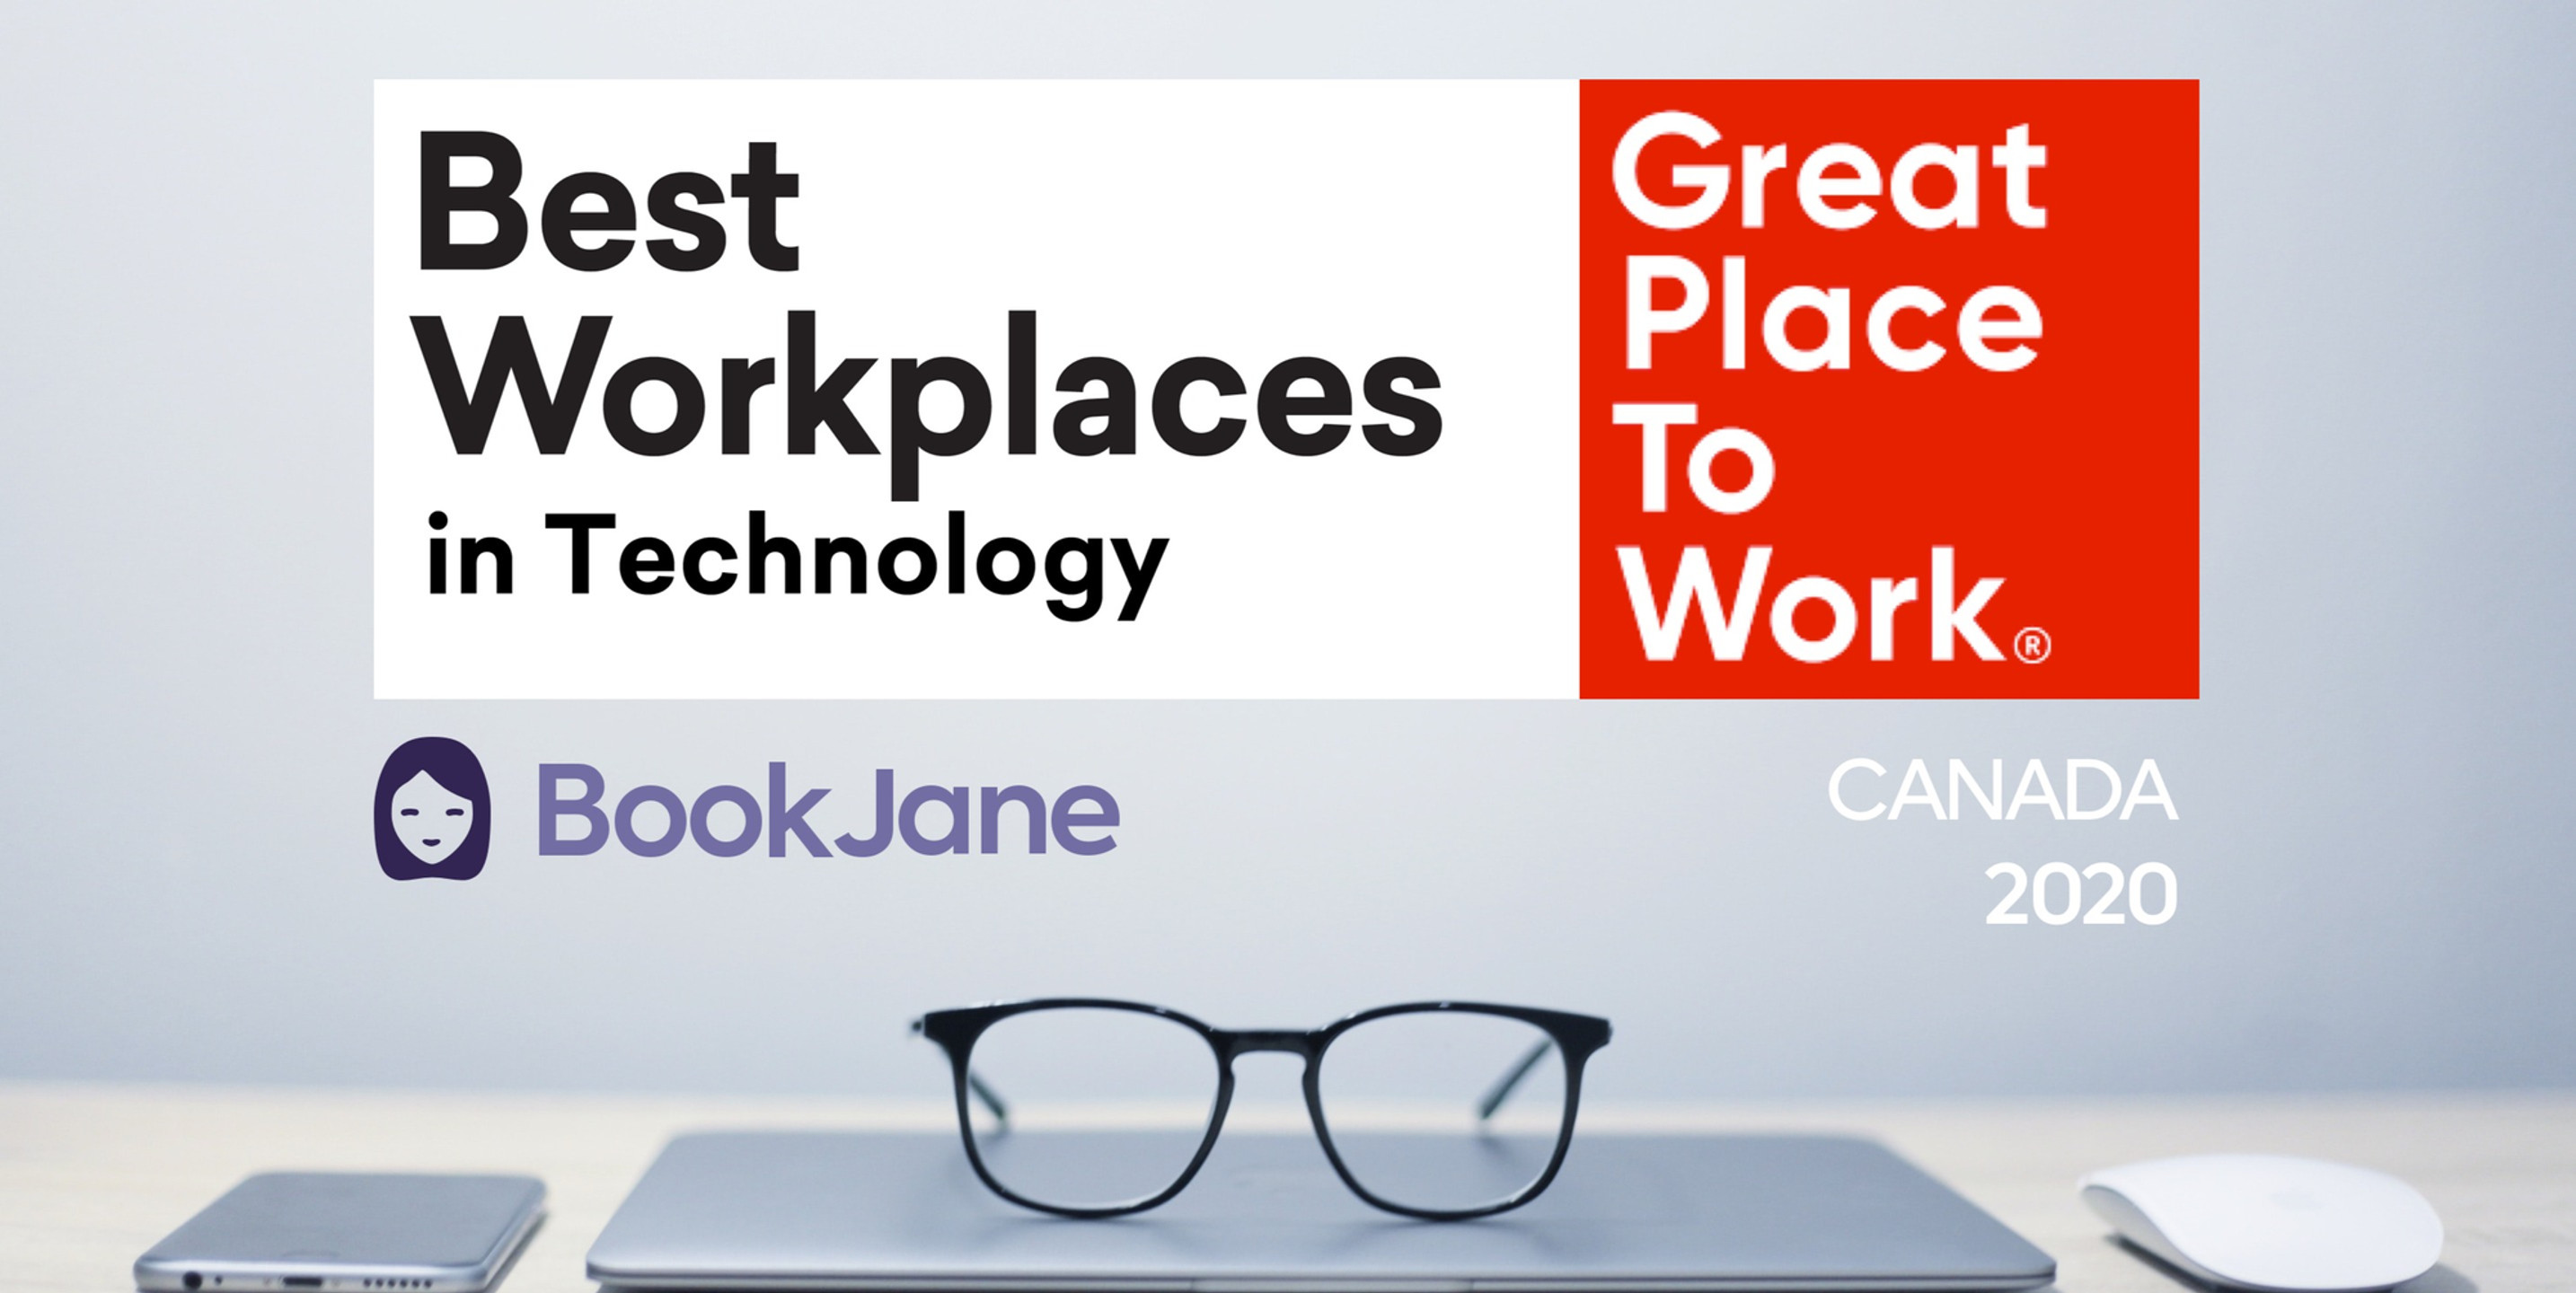 Image of BookJane making it to the 2020 list of best places to work in tech